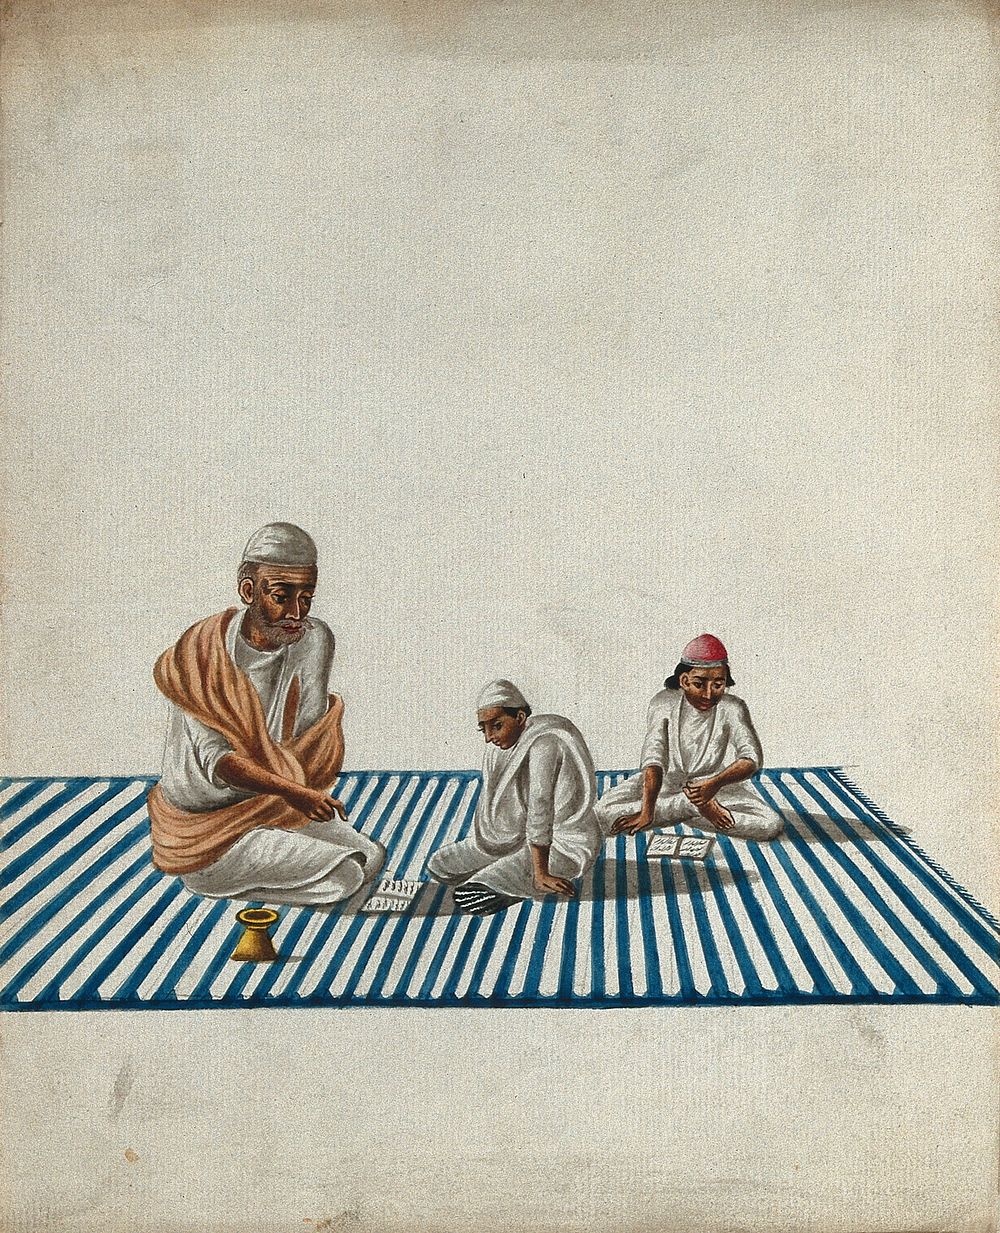 A Muslim teacher giving lessons to two children. Gouache painting by an Indian artist.